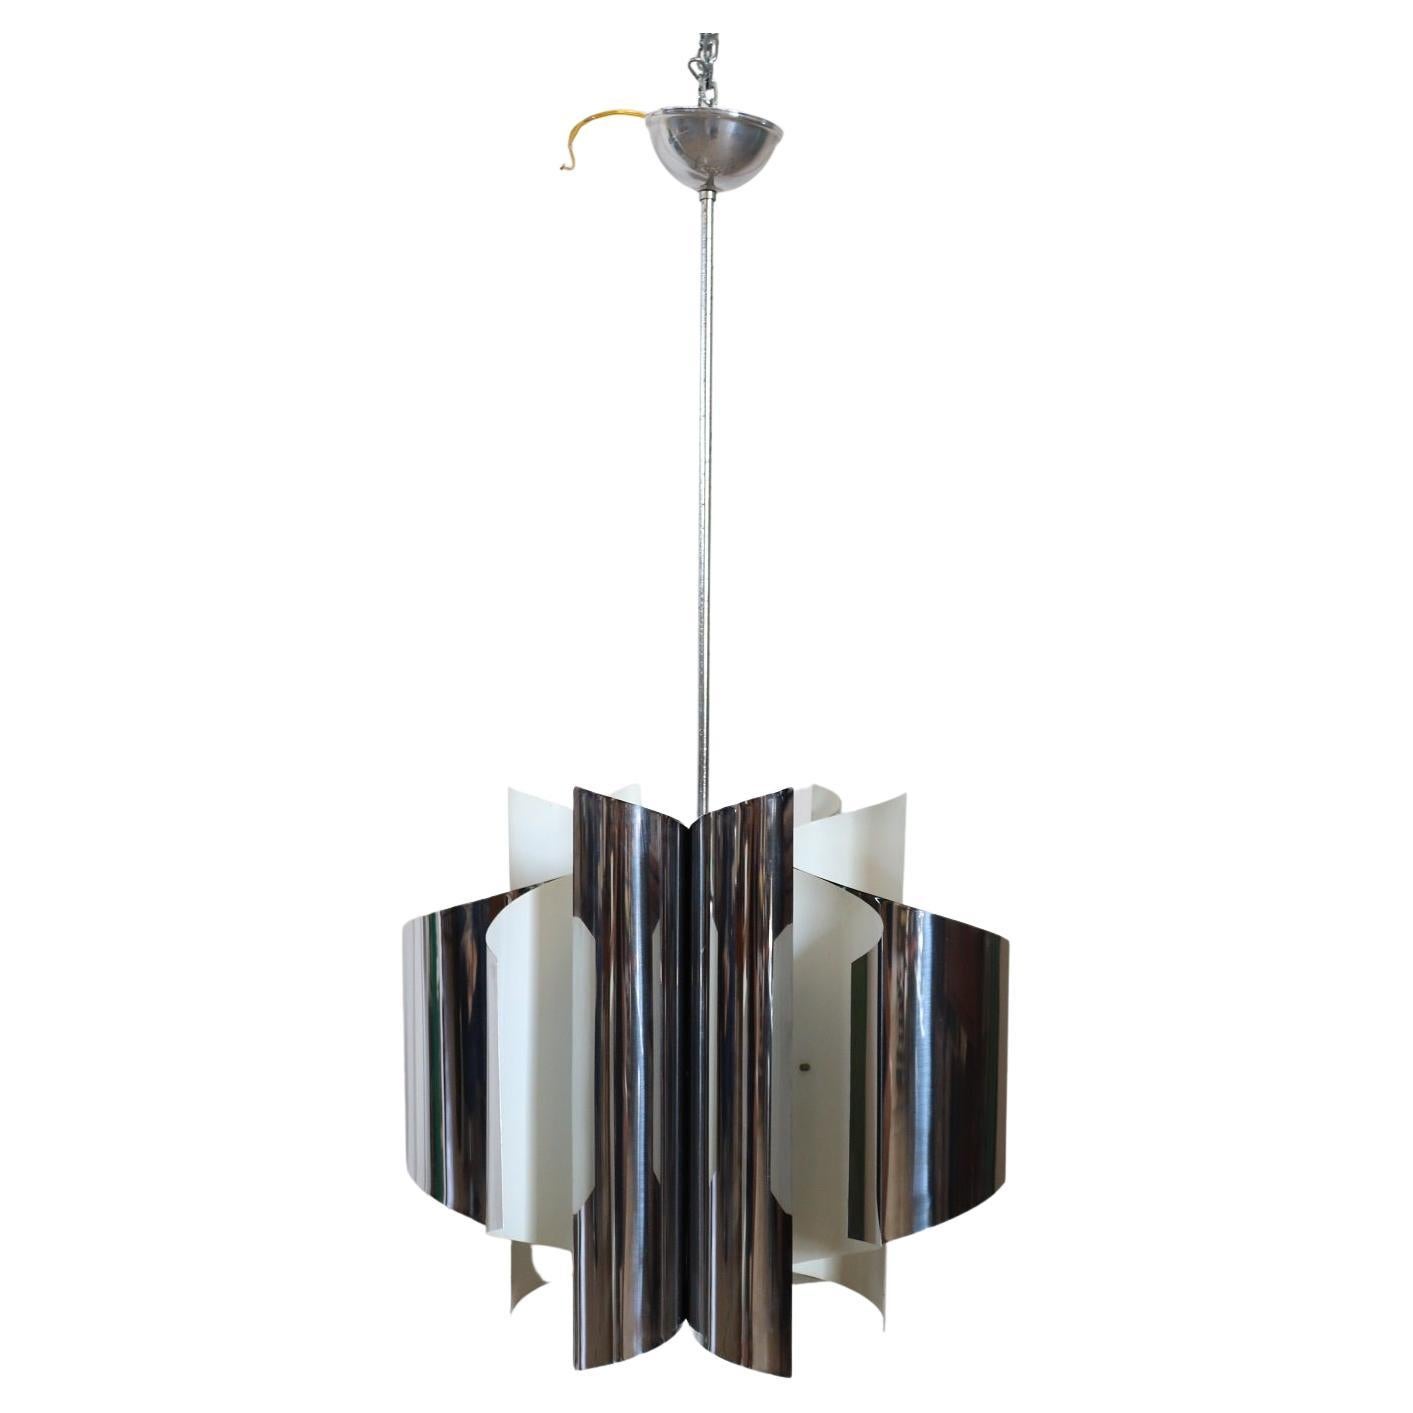 Italian Design Space Age Chandelier in Steel with 6 Light Bulbs , 1970s For Sale